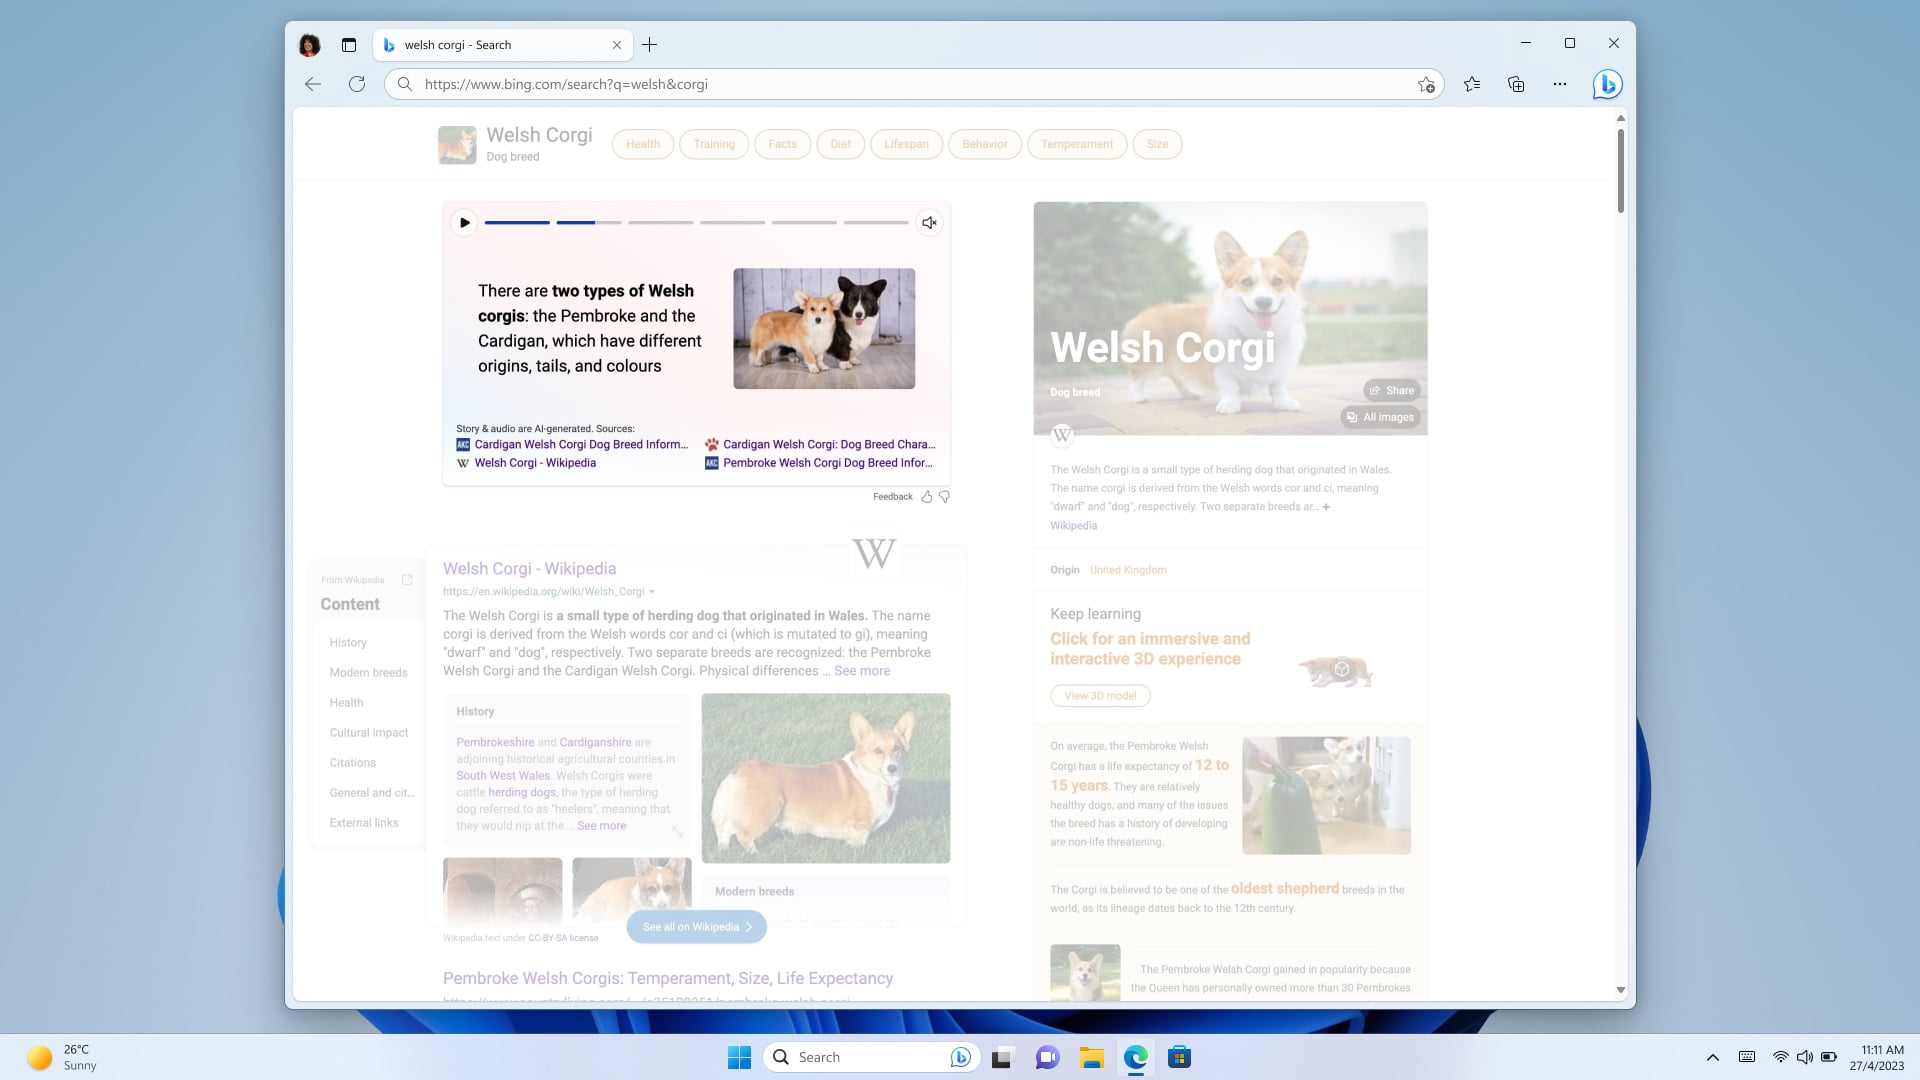 Microsoft launches Bing Stories, which will briefly display information about a search query